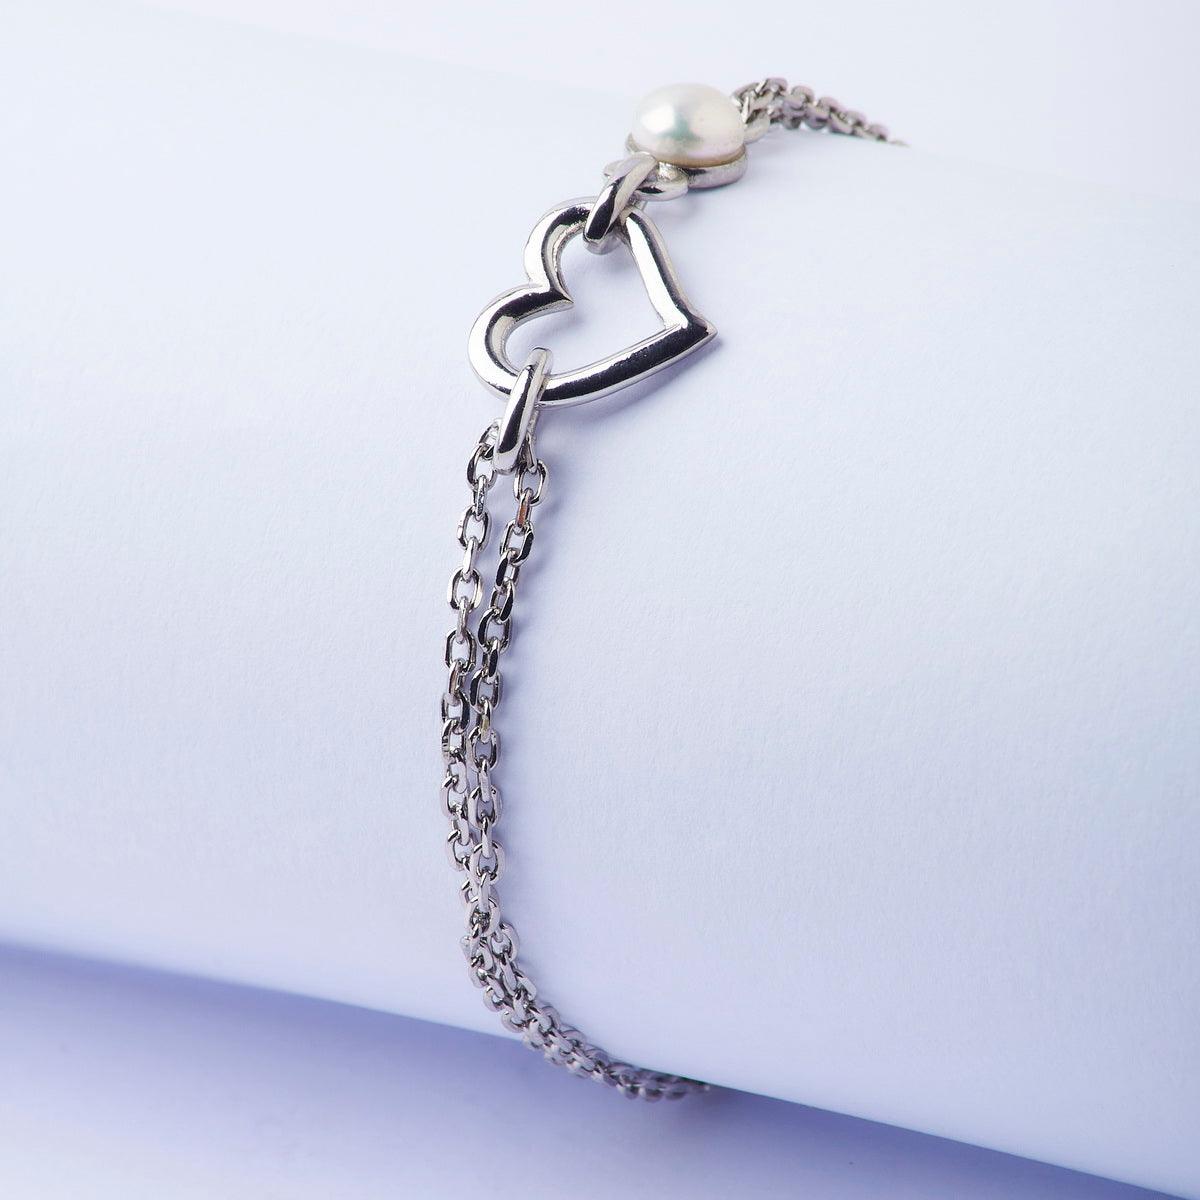 Pearl Bracelet with Paw Charm and Engraved Silver Heart | Charming Engraving